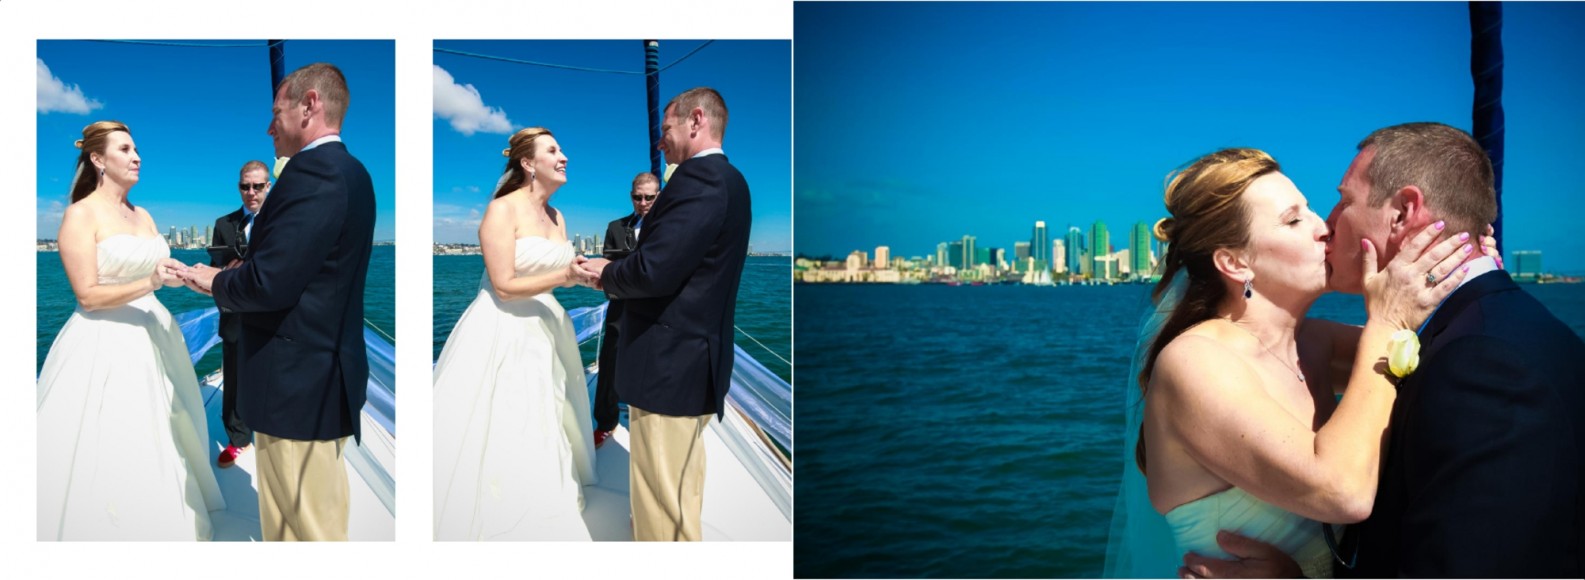 Laura and Davids Wedding Book - San Diego Yacht Wedding by Wedding Photographers Andrew Abouna - Pages 18-19